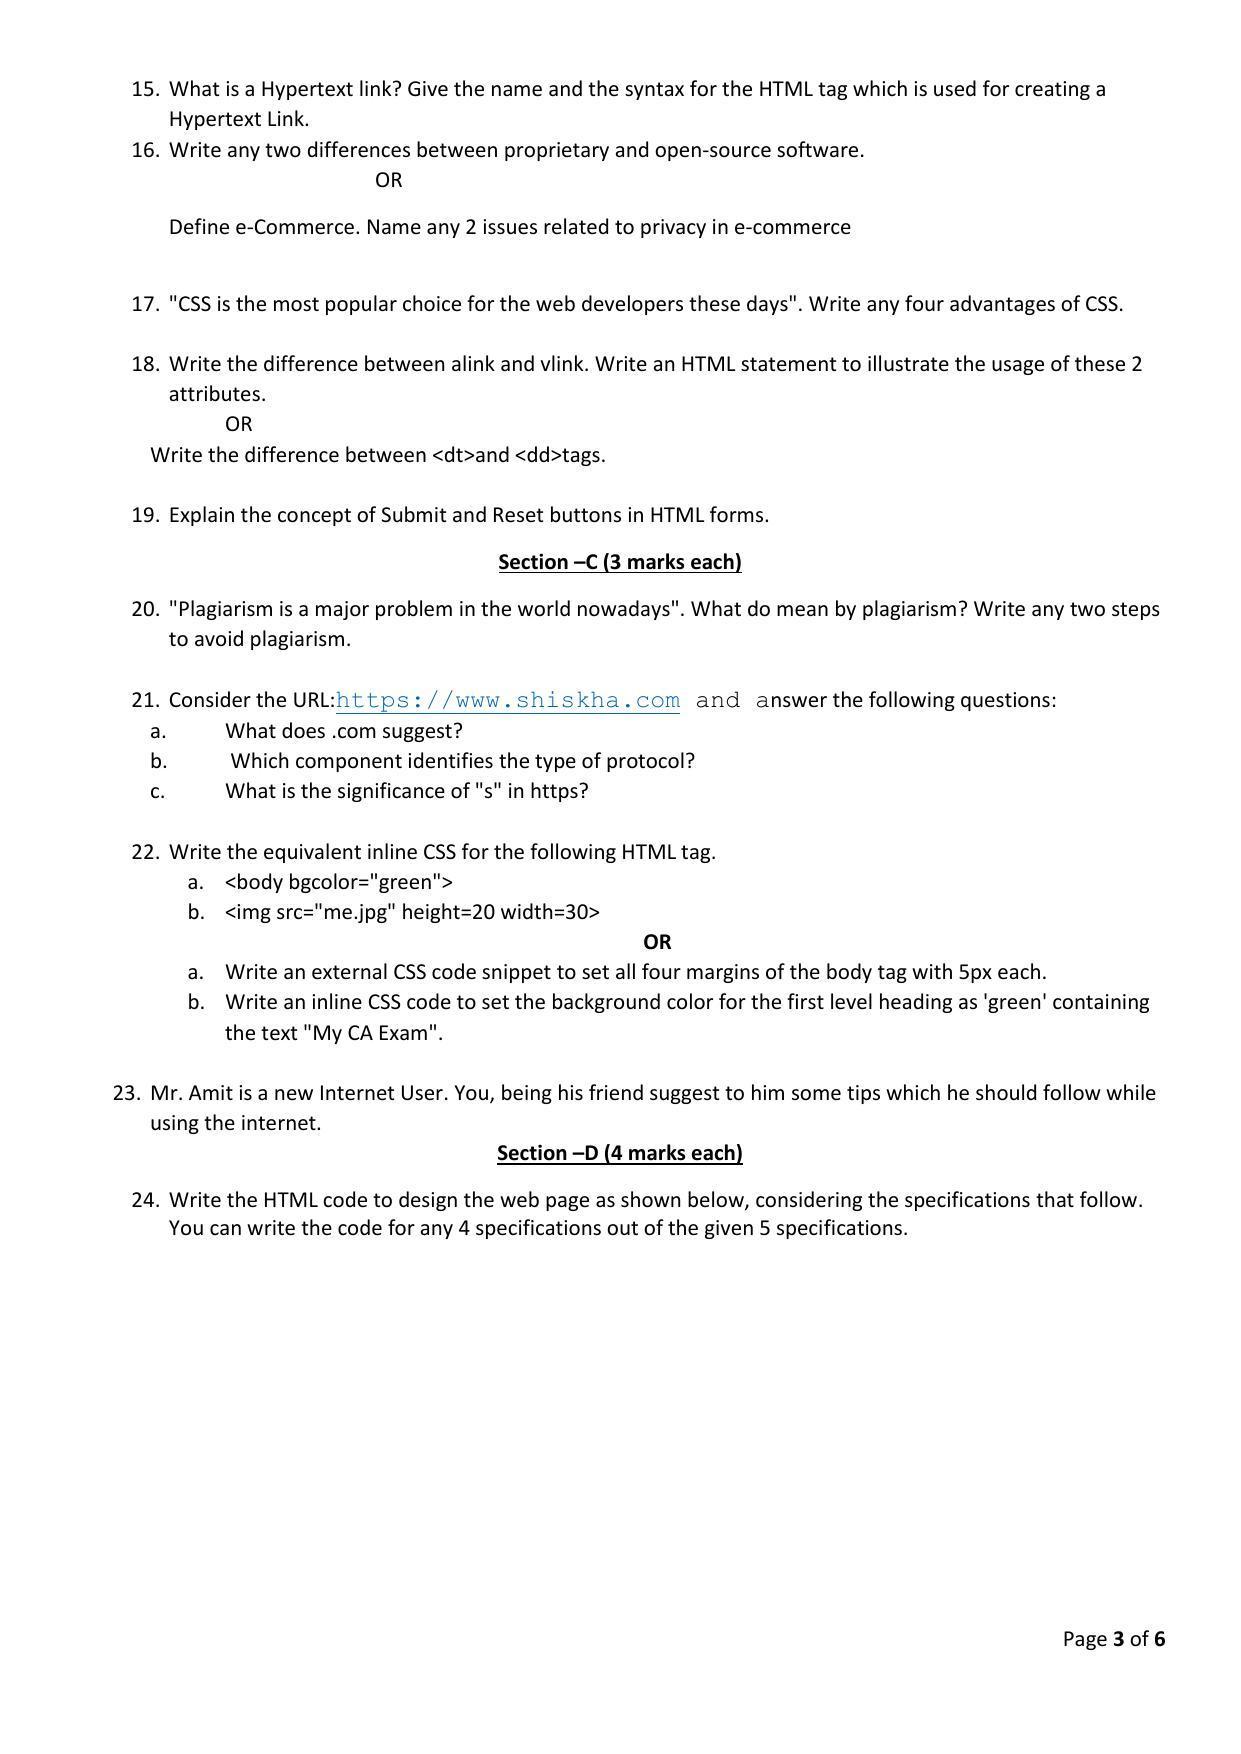 CBSE Class 10 Computer Application Sample Papers 2023 - Page 3